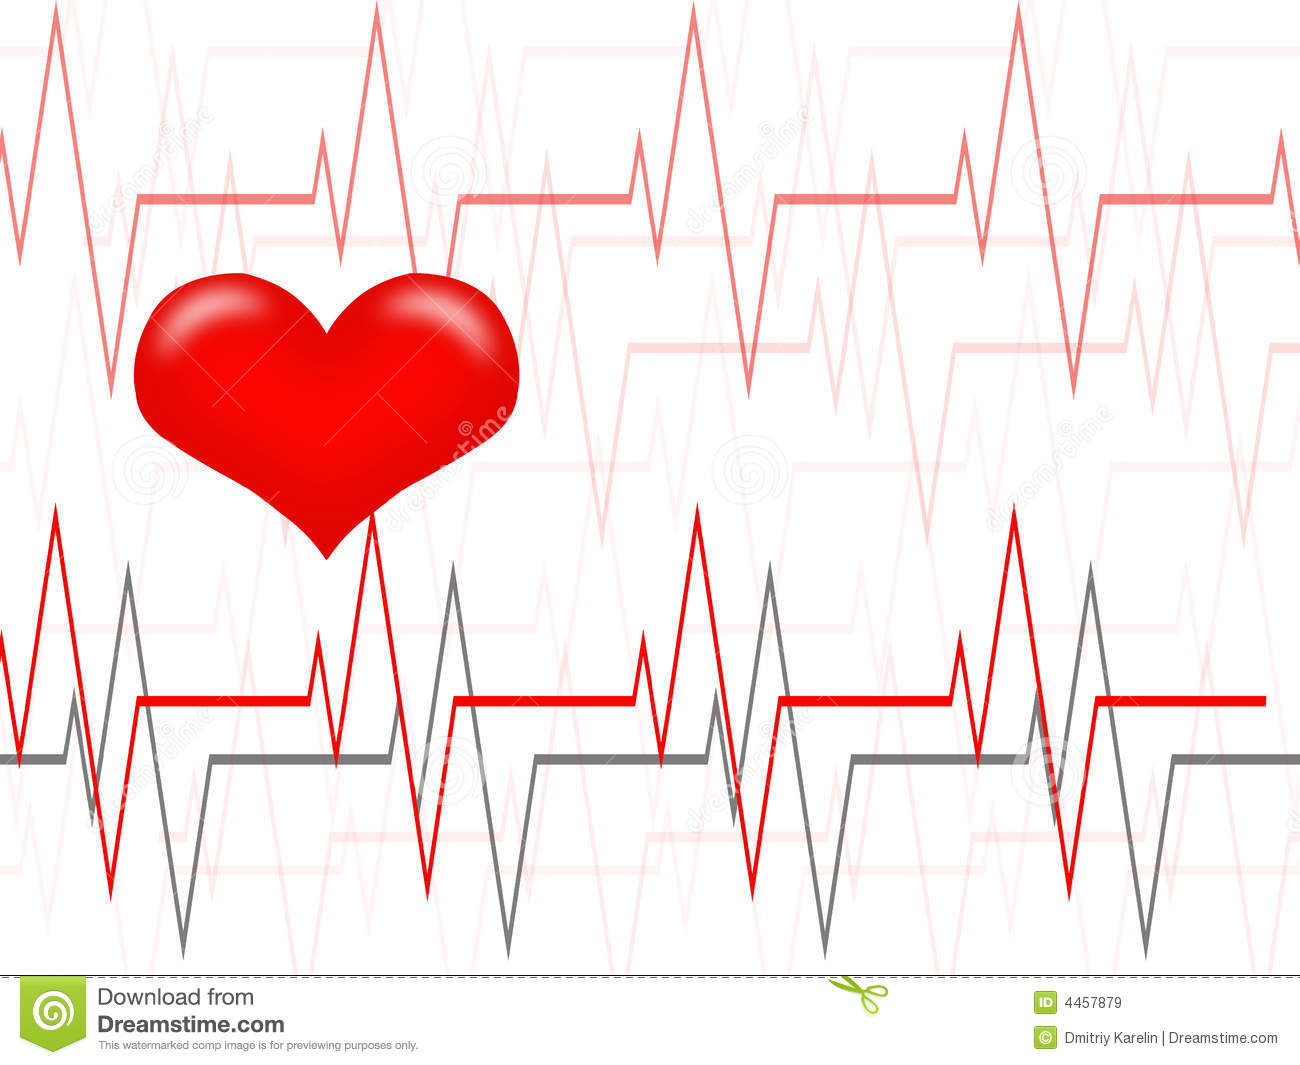 Cardiology Royalty Free Stock Images   Image  4457879